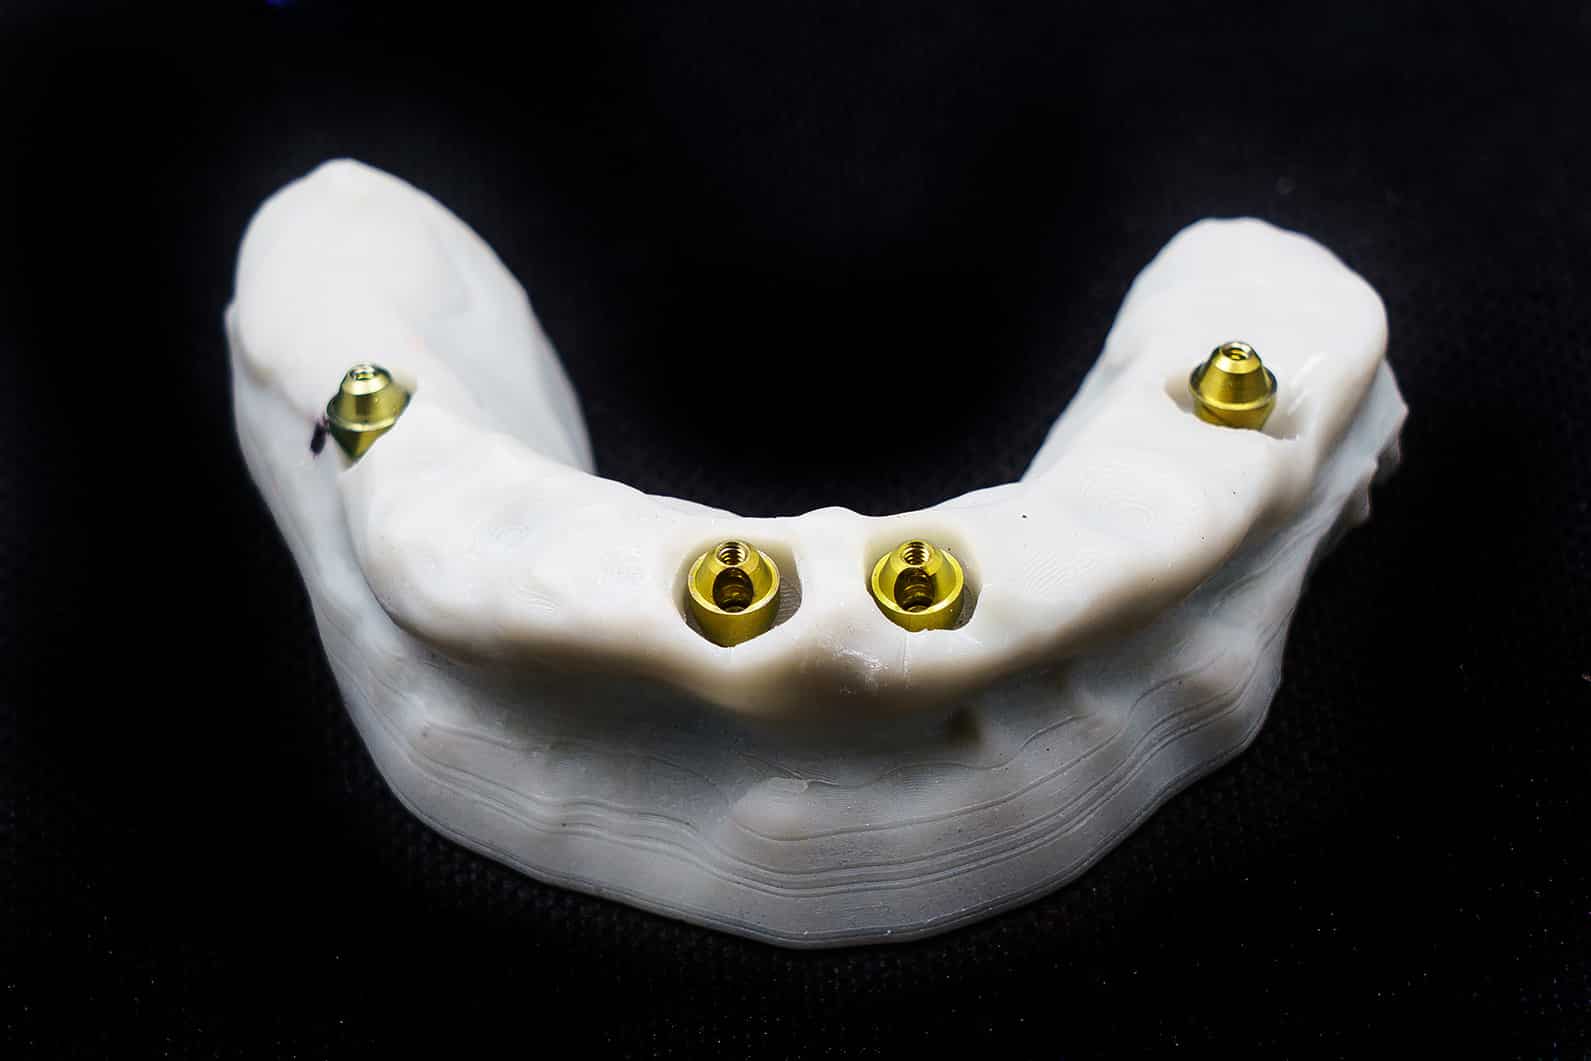 multi-tooth implants at Smiles Only